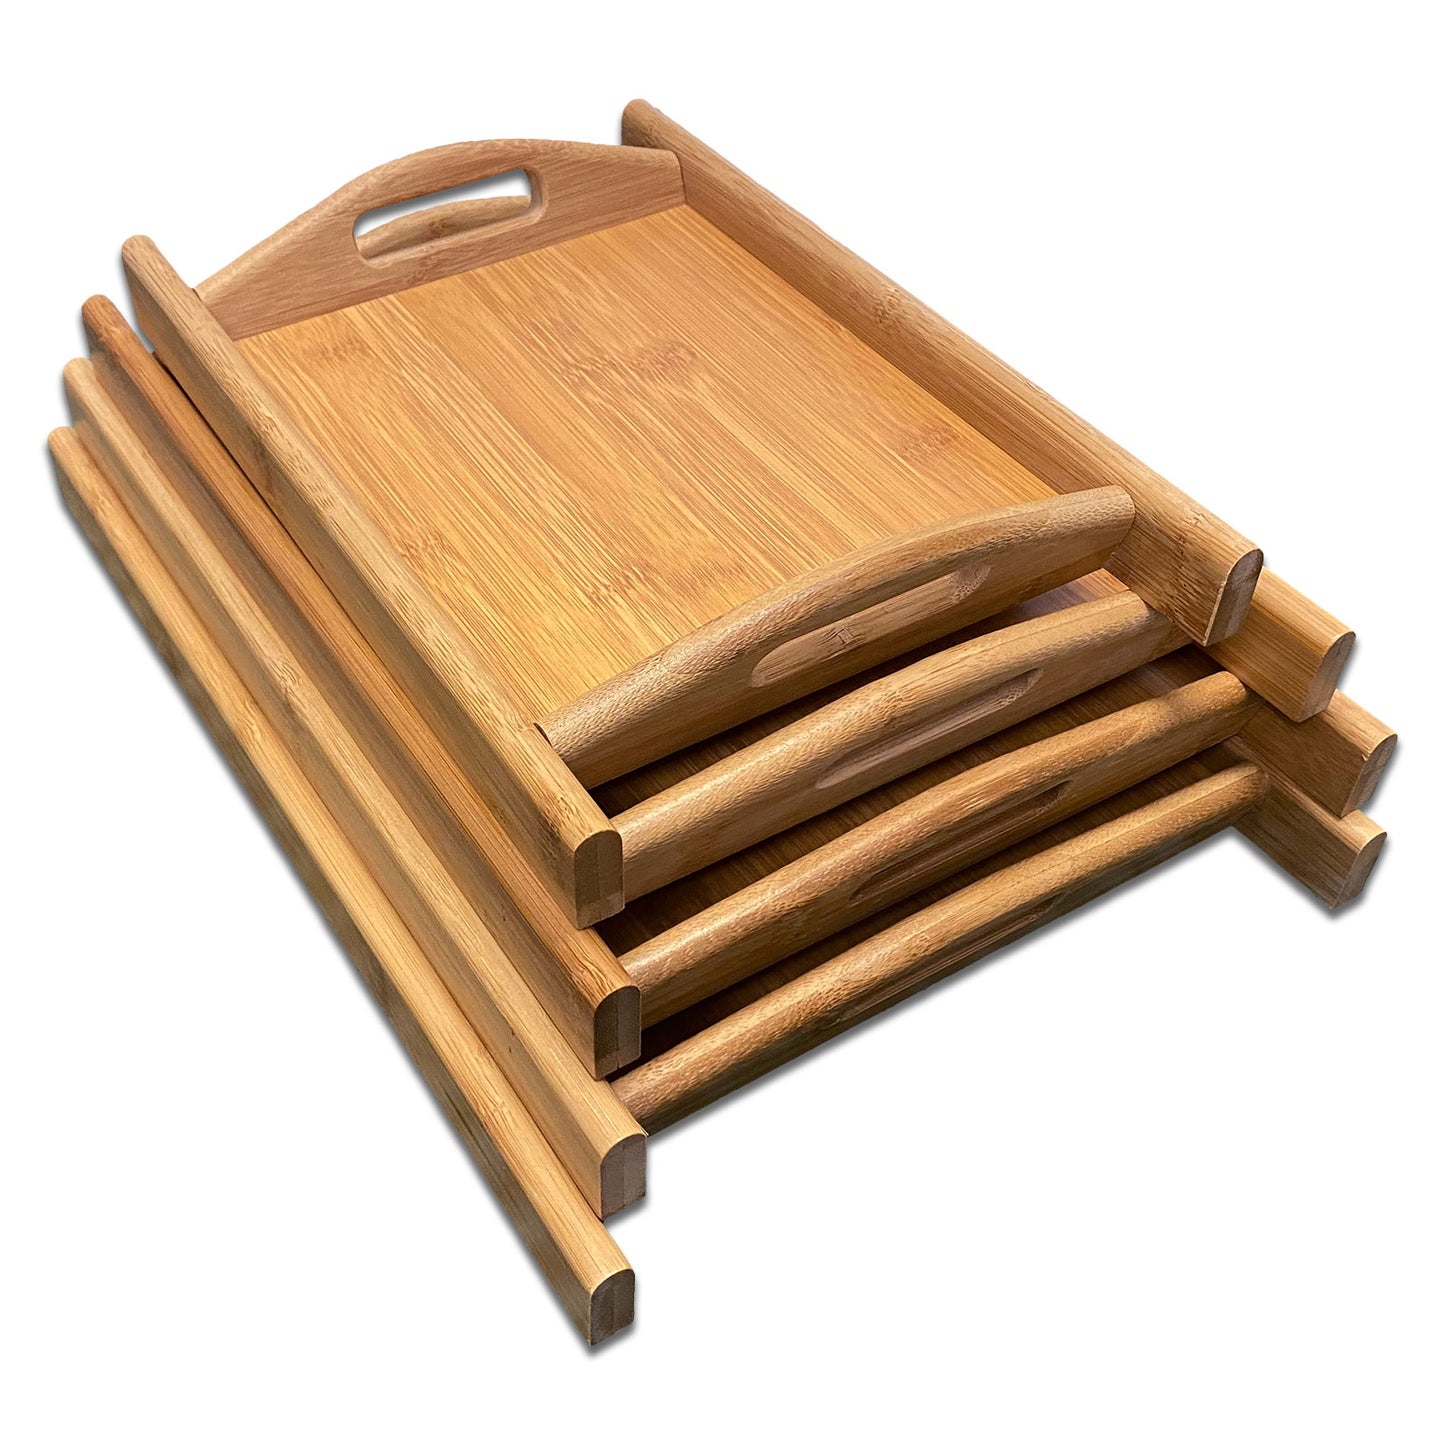 13" x 9" Bam & Boo Natural Bamboo Serving Tray with Handles